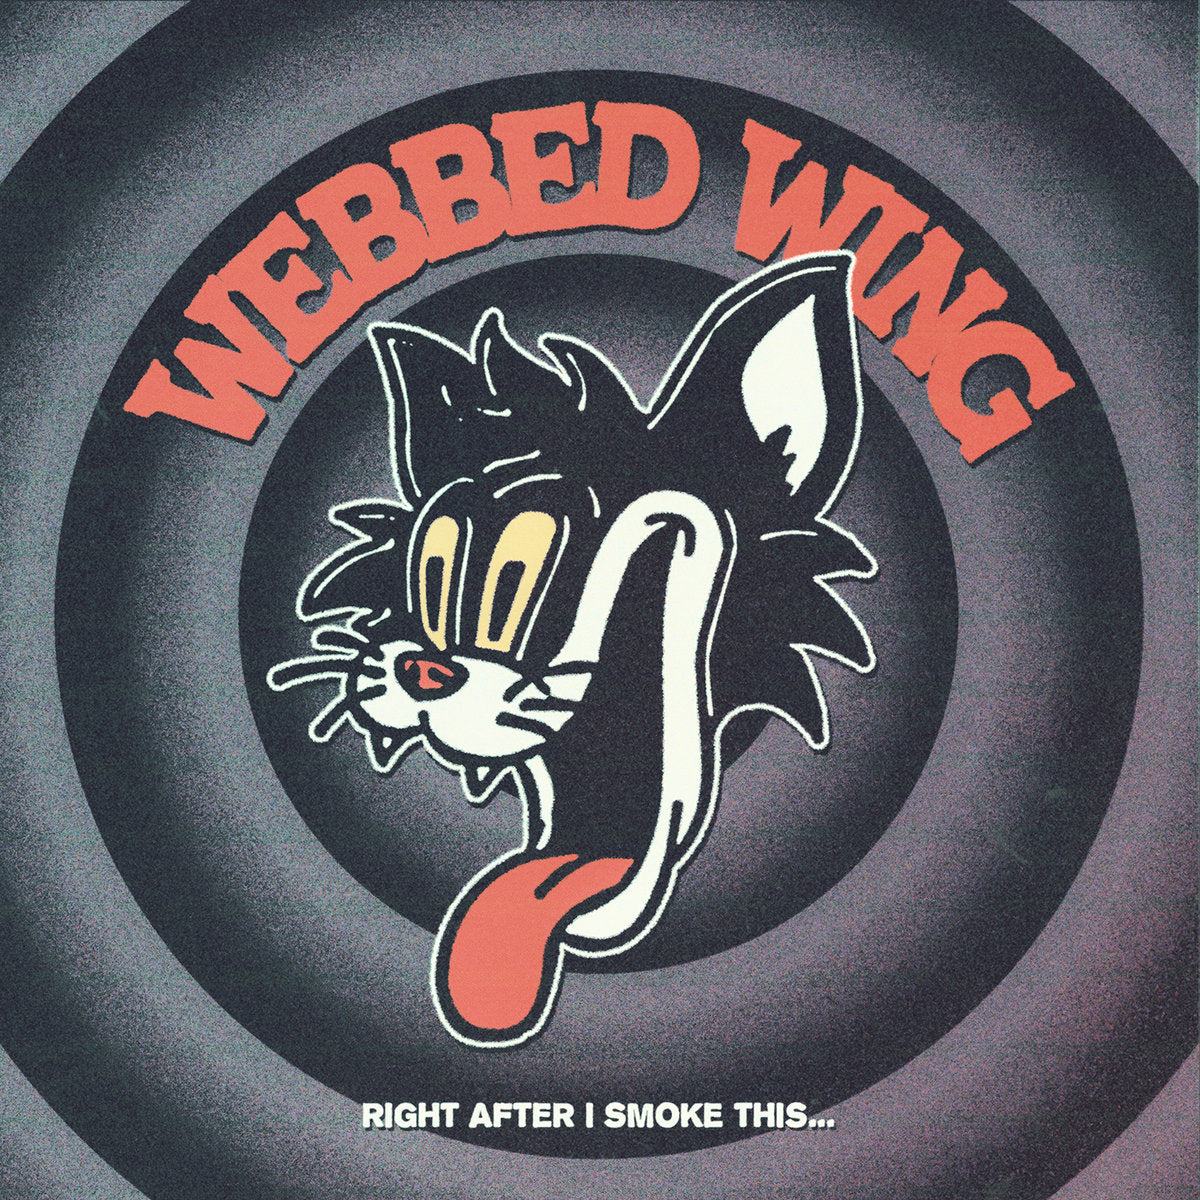 Webbed Wing  "Right After I Smoke This"  7"